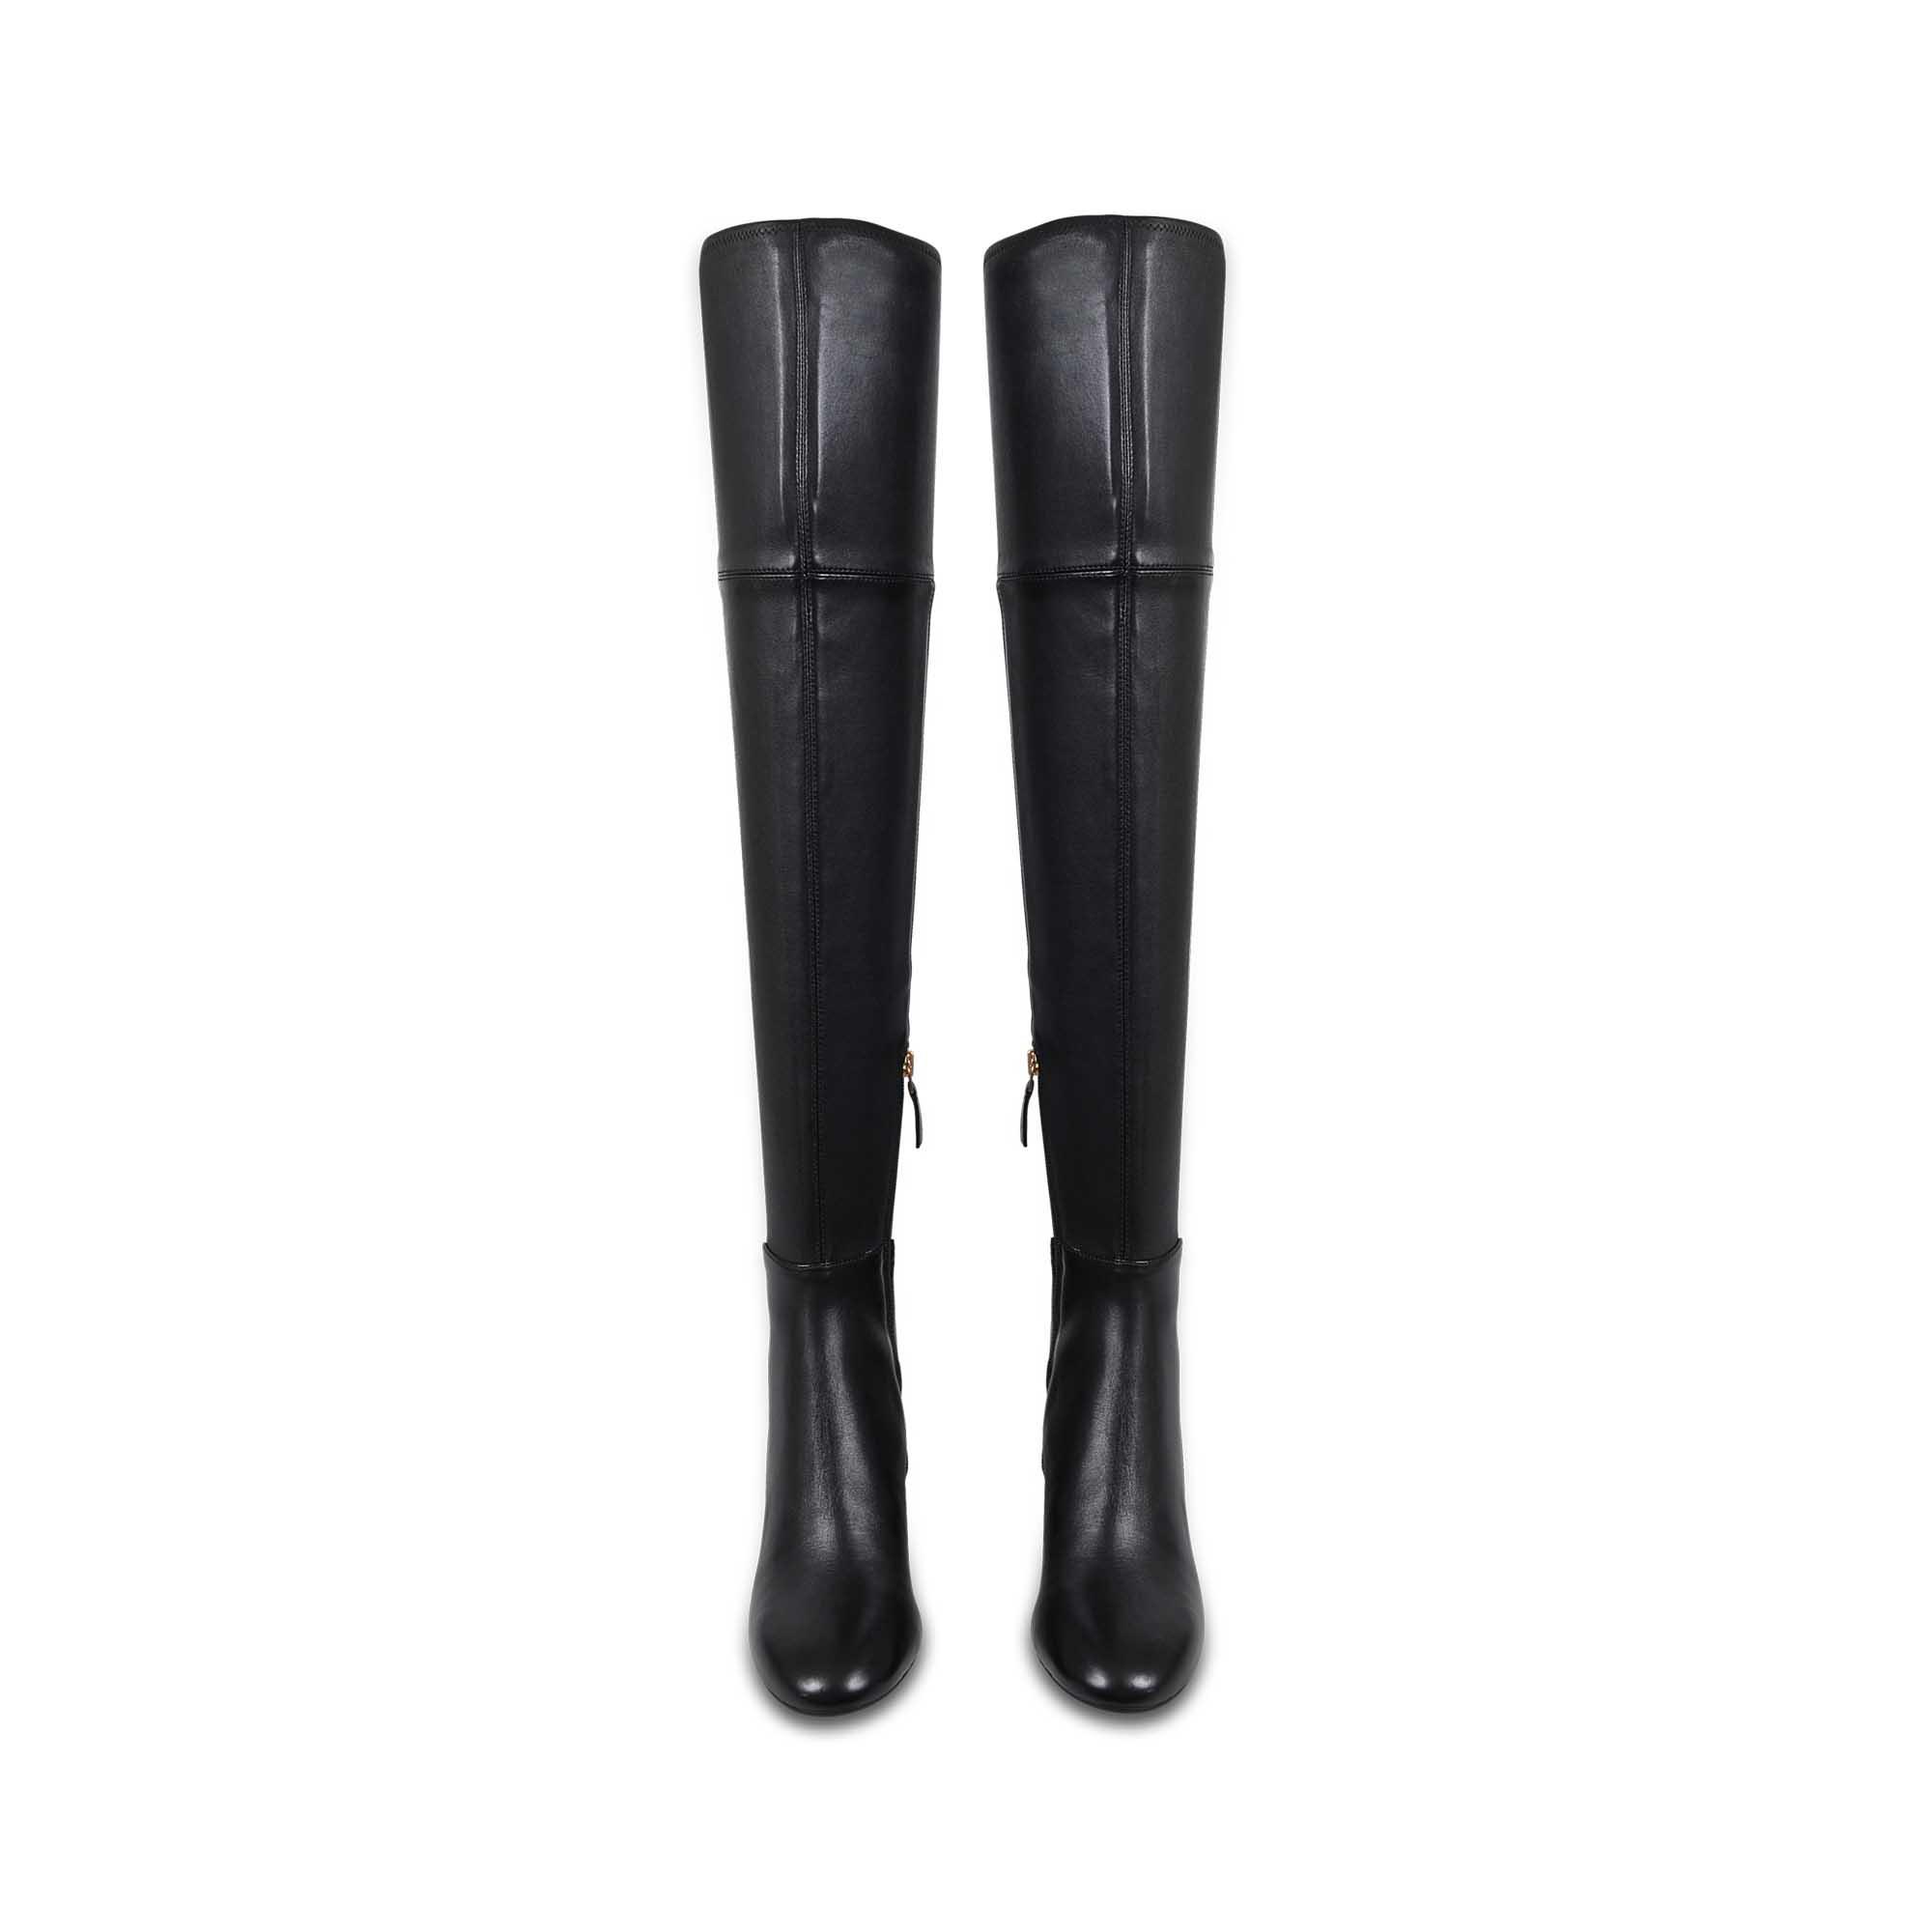 Tory Burch Laila Over The Knee Boots in Black | Lyst Canada